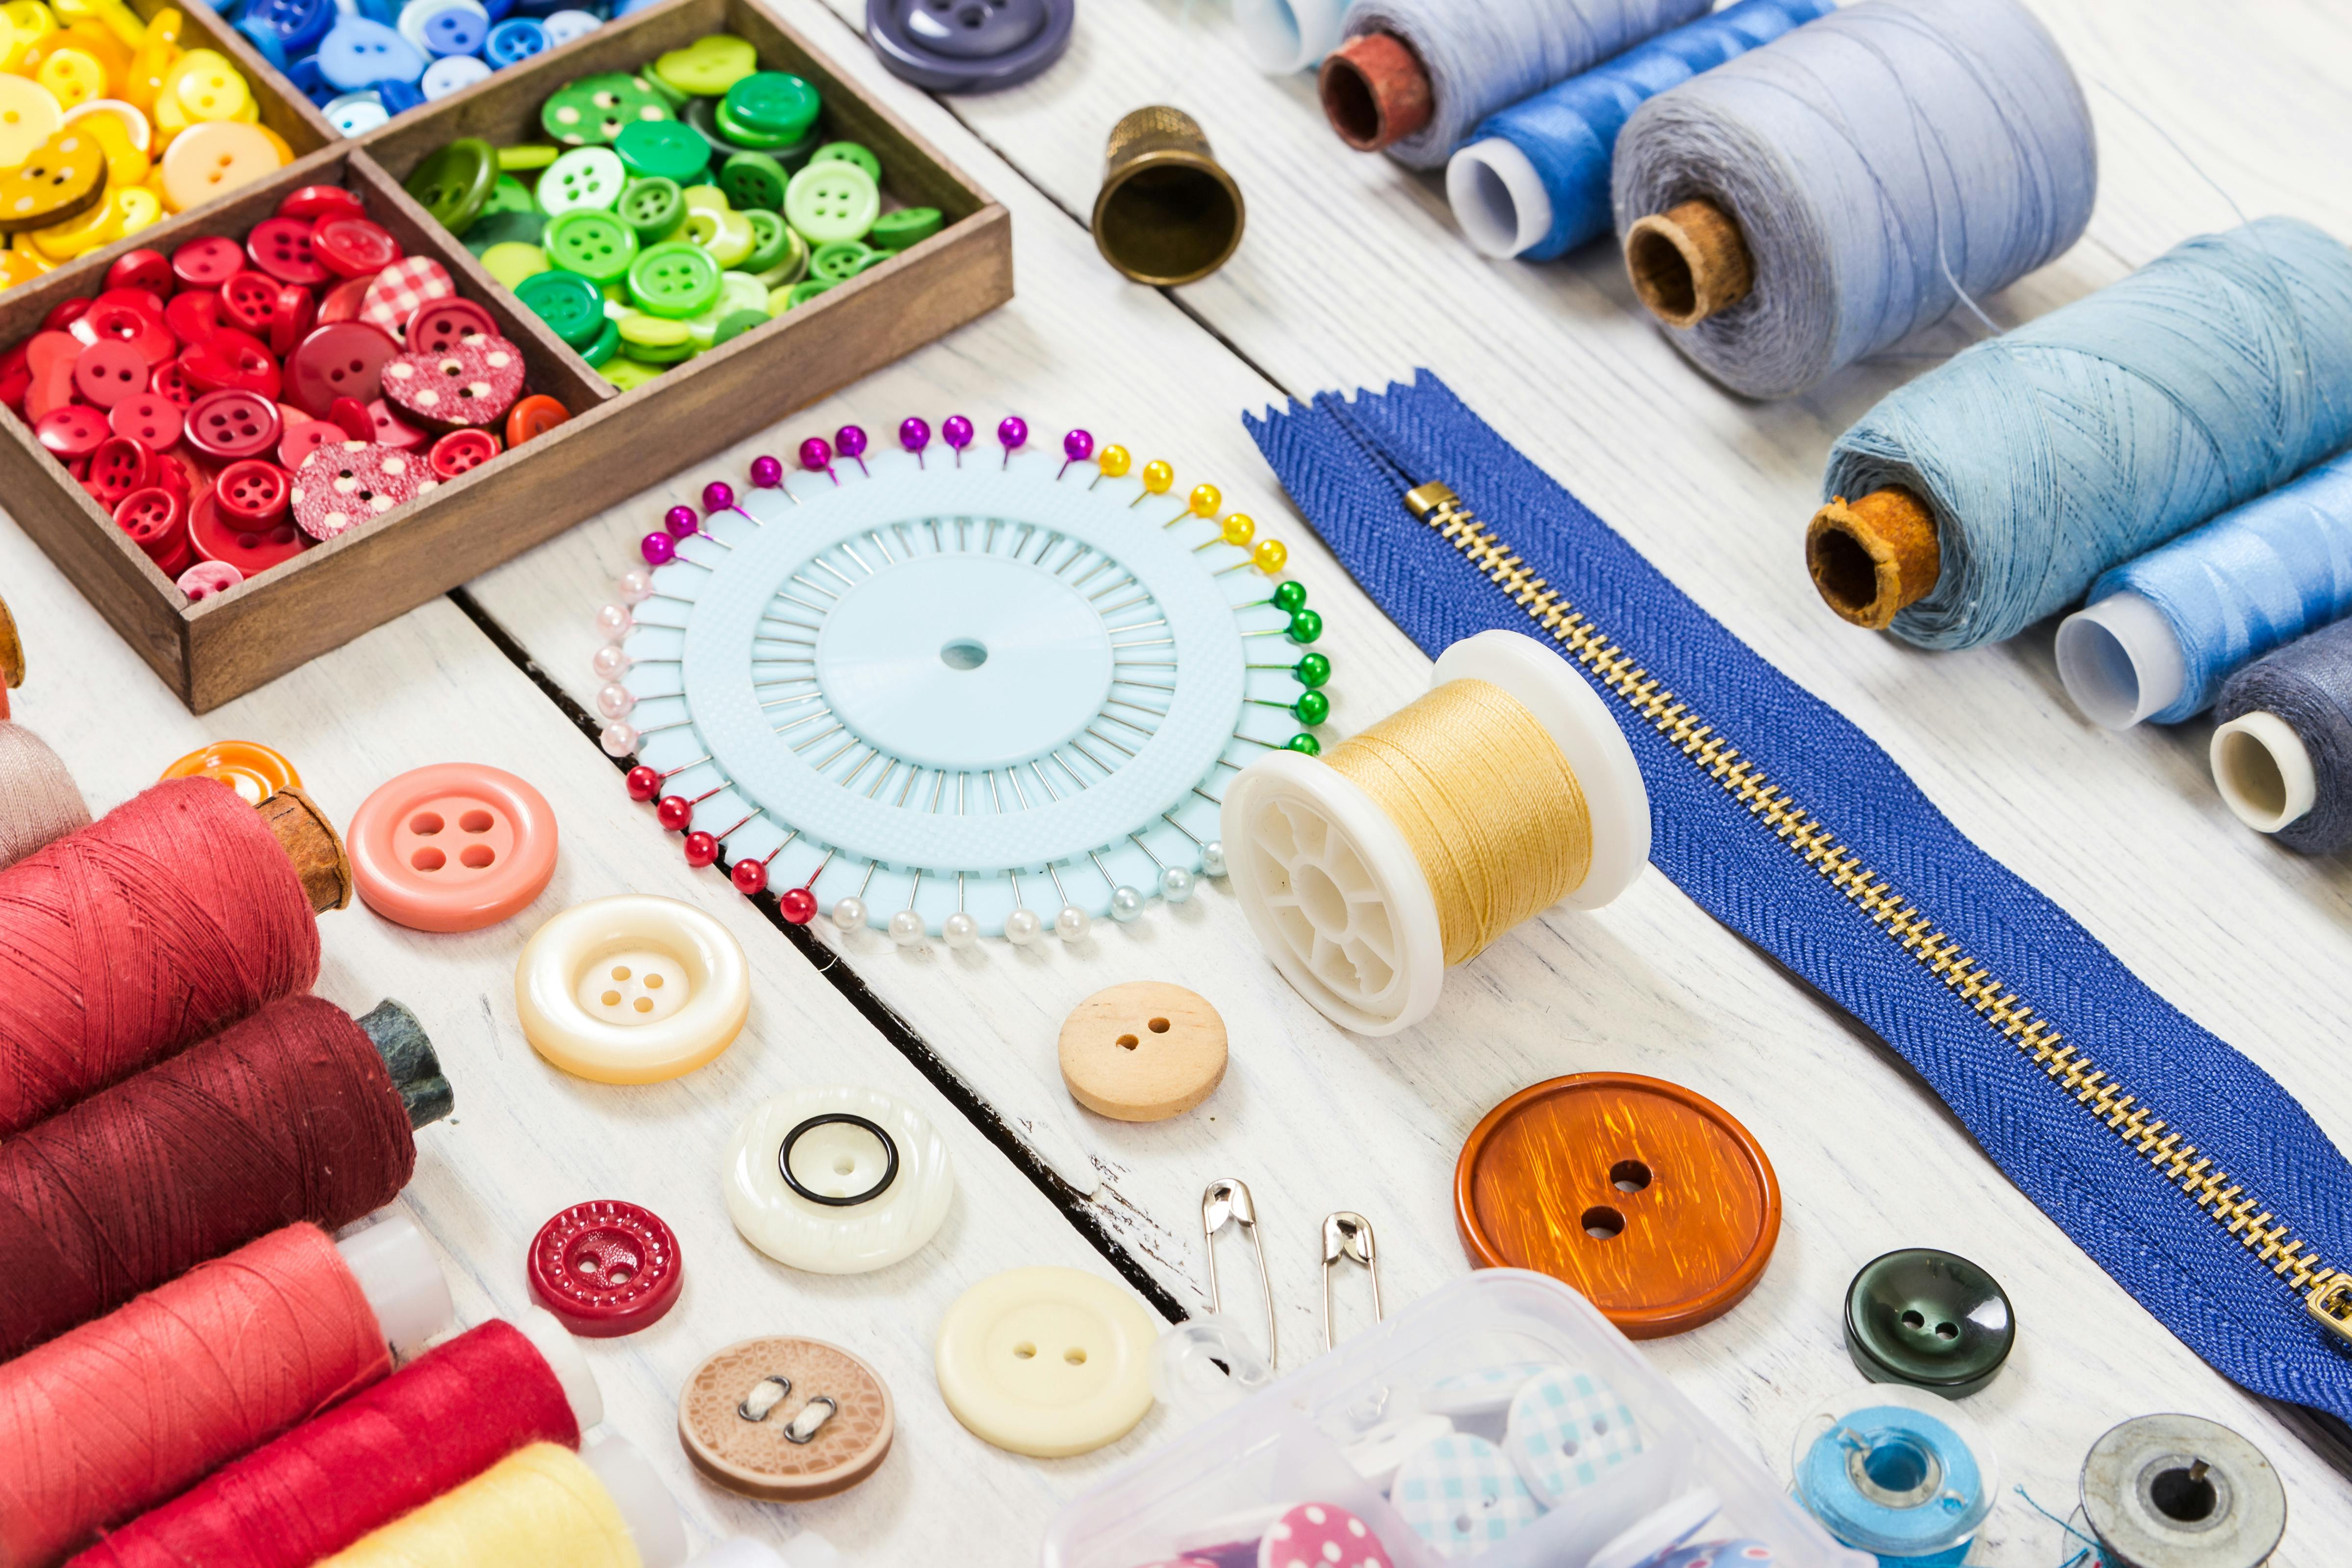 tailor or sewing accessories and supplies with tools at wooden